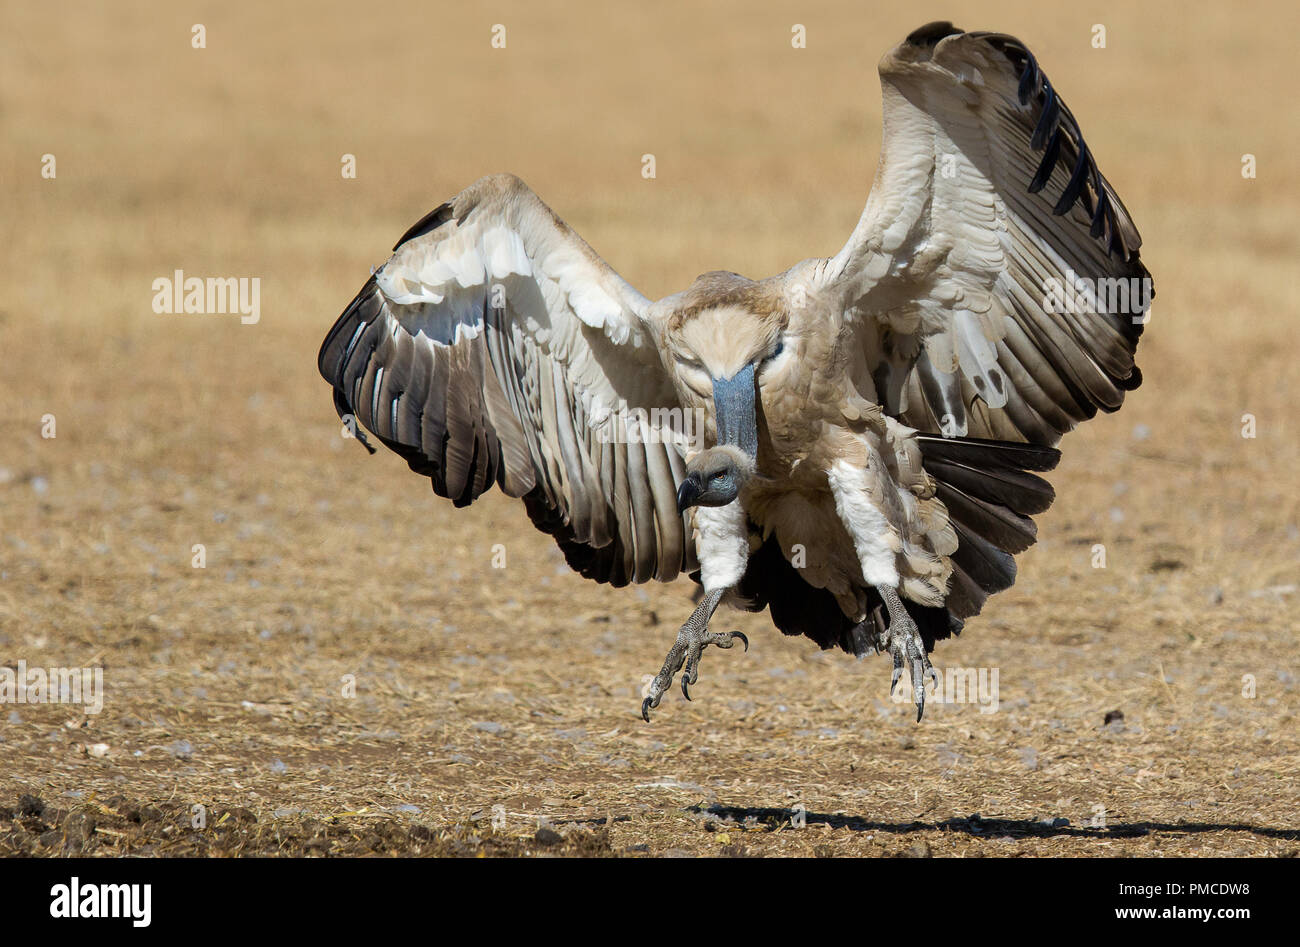 A flying cape vulture photographed in South Africa Stock Photo